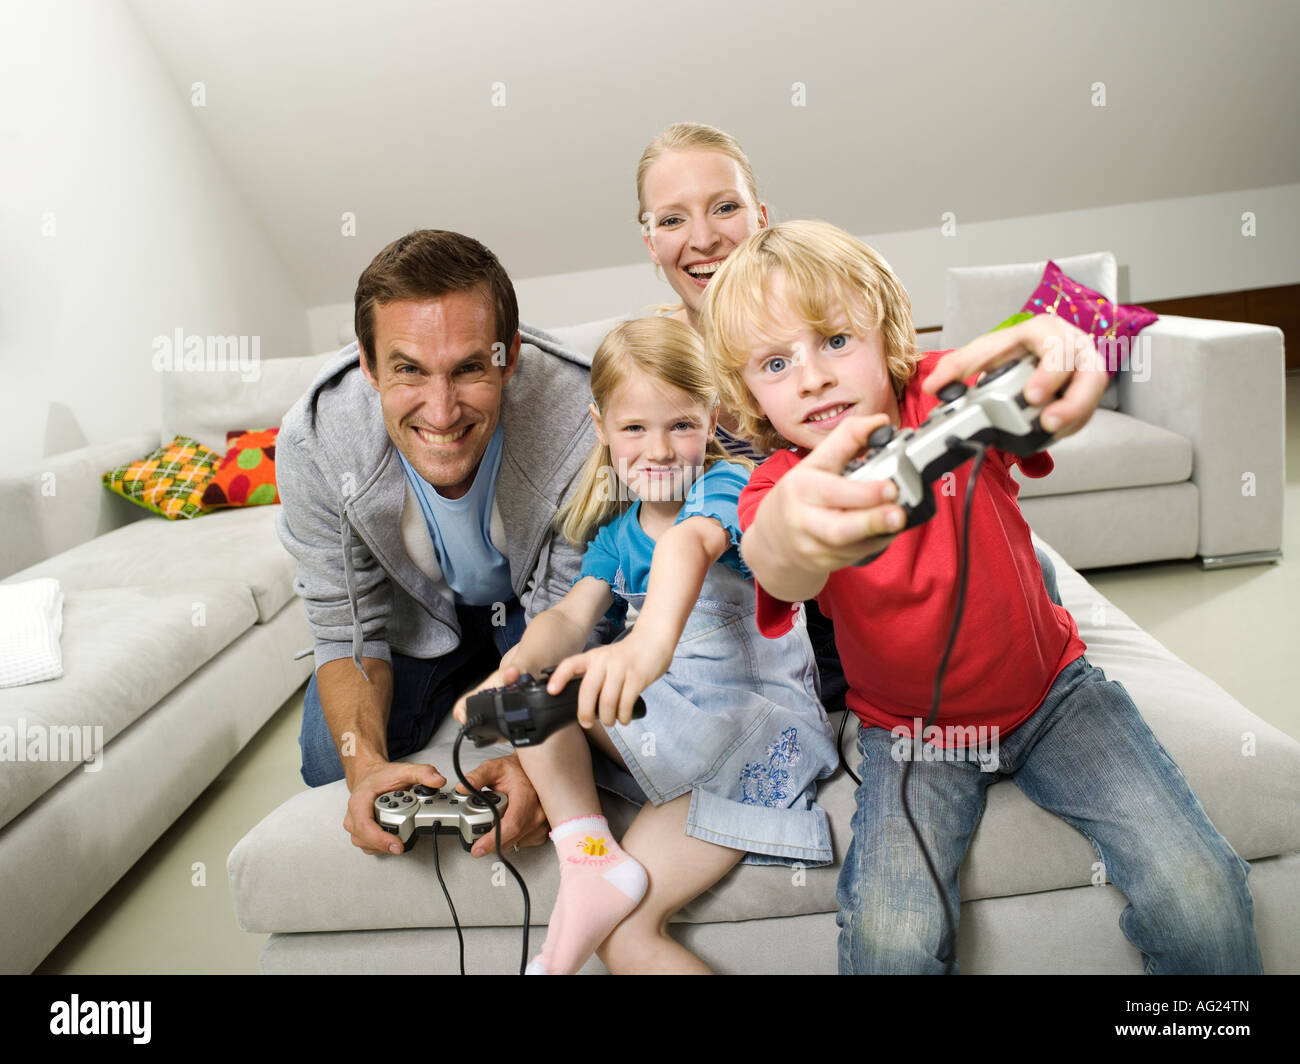 Family playing compouter game Stock Photo